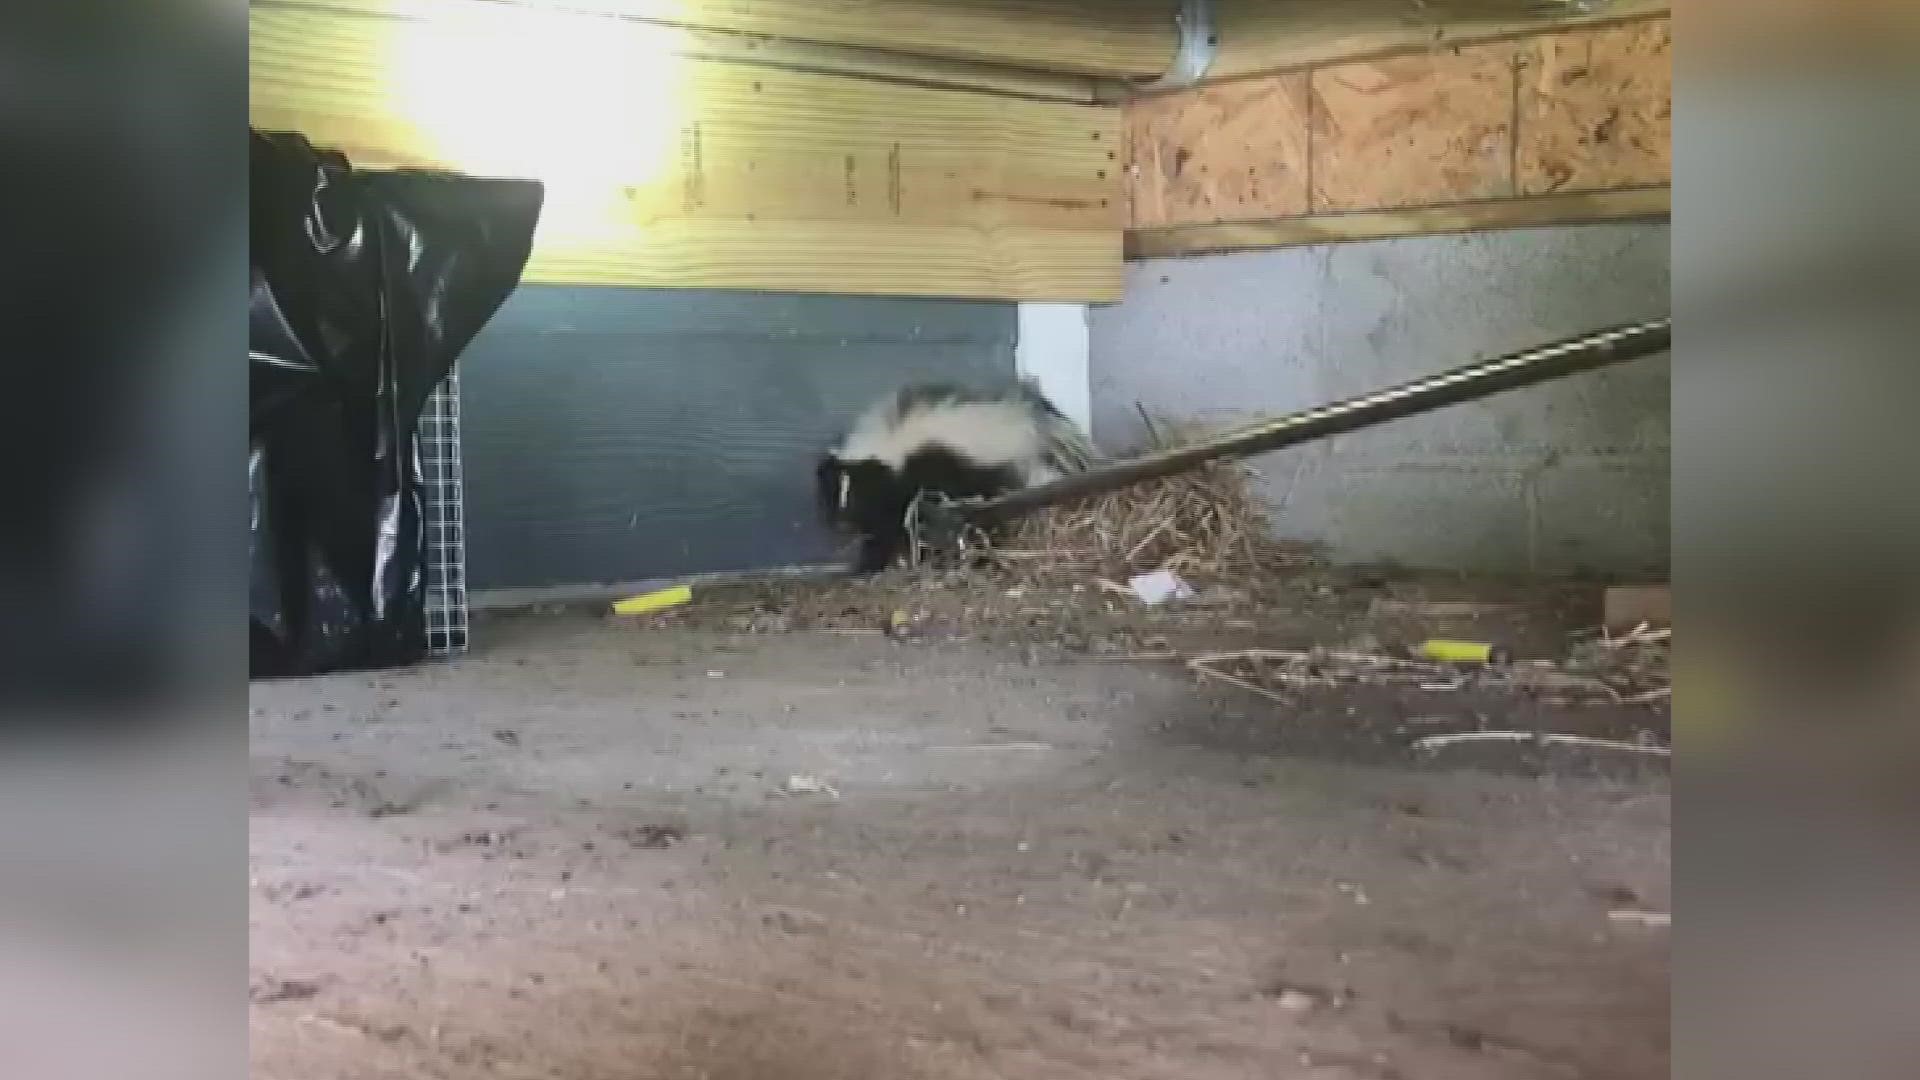 TWRA says to close off any openings around your house where skunks could inside.